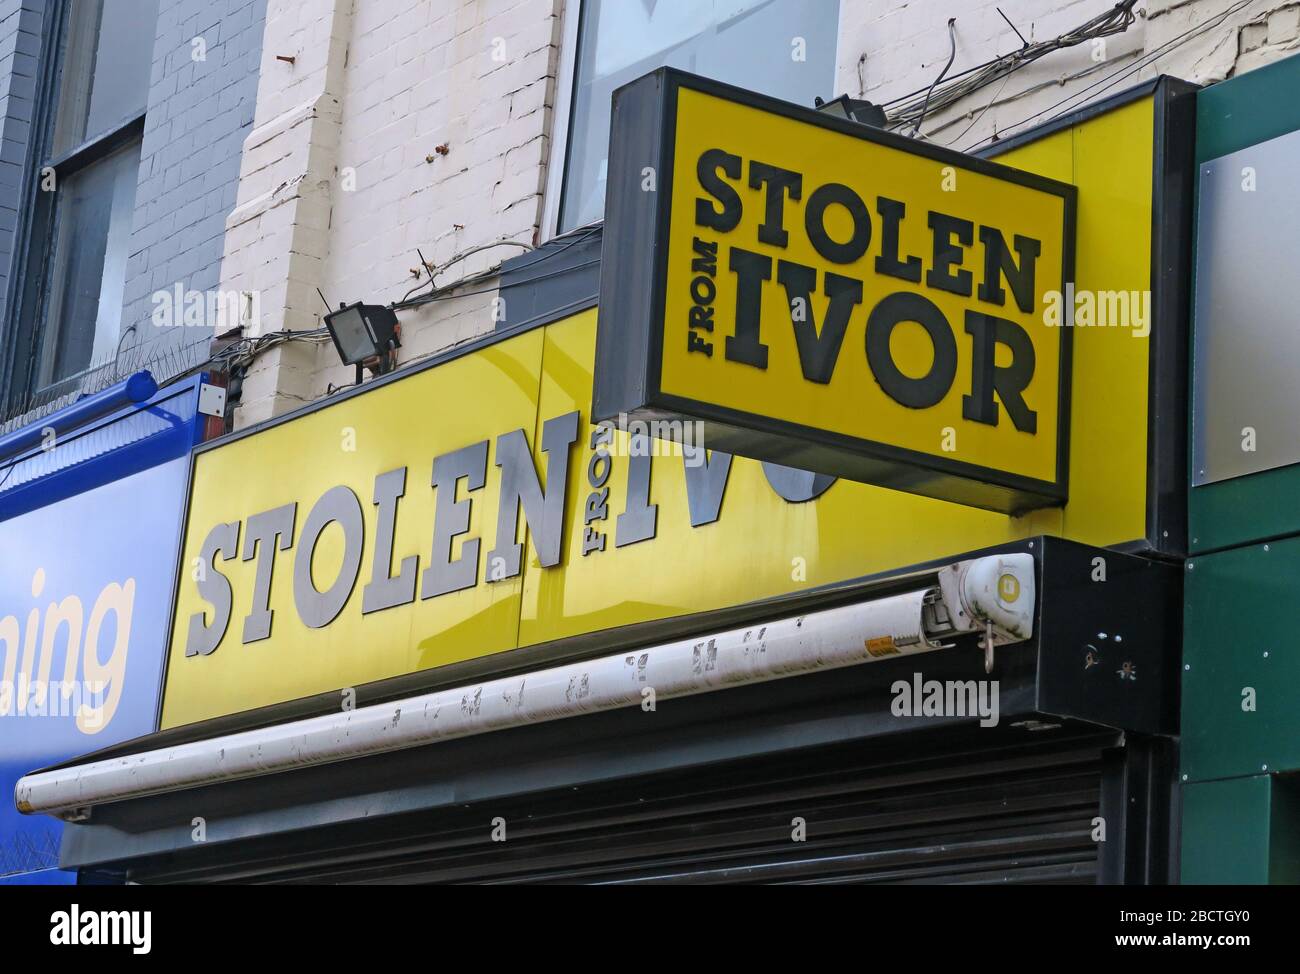 Stolen From Ivor, famous mens outfitters, Ivor Hazan, Stockport, Greater Manchester, Cheshire, England, UK, 77-79 Prince's St, Stockport SK1 1RW Stock Photo